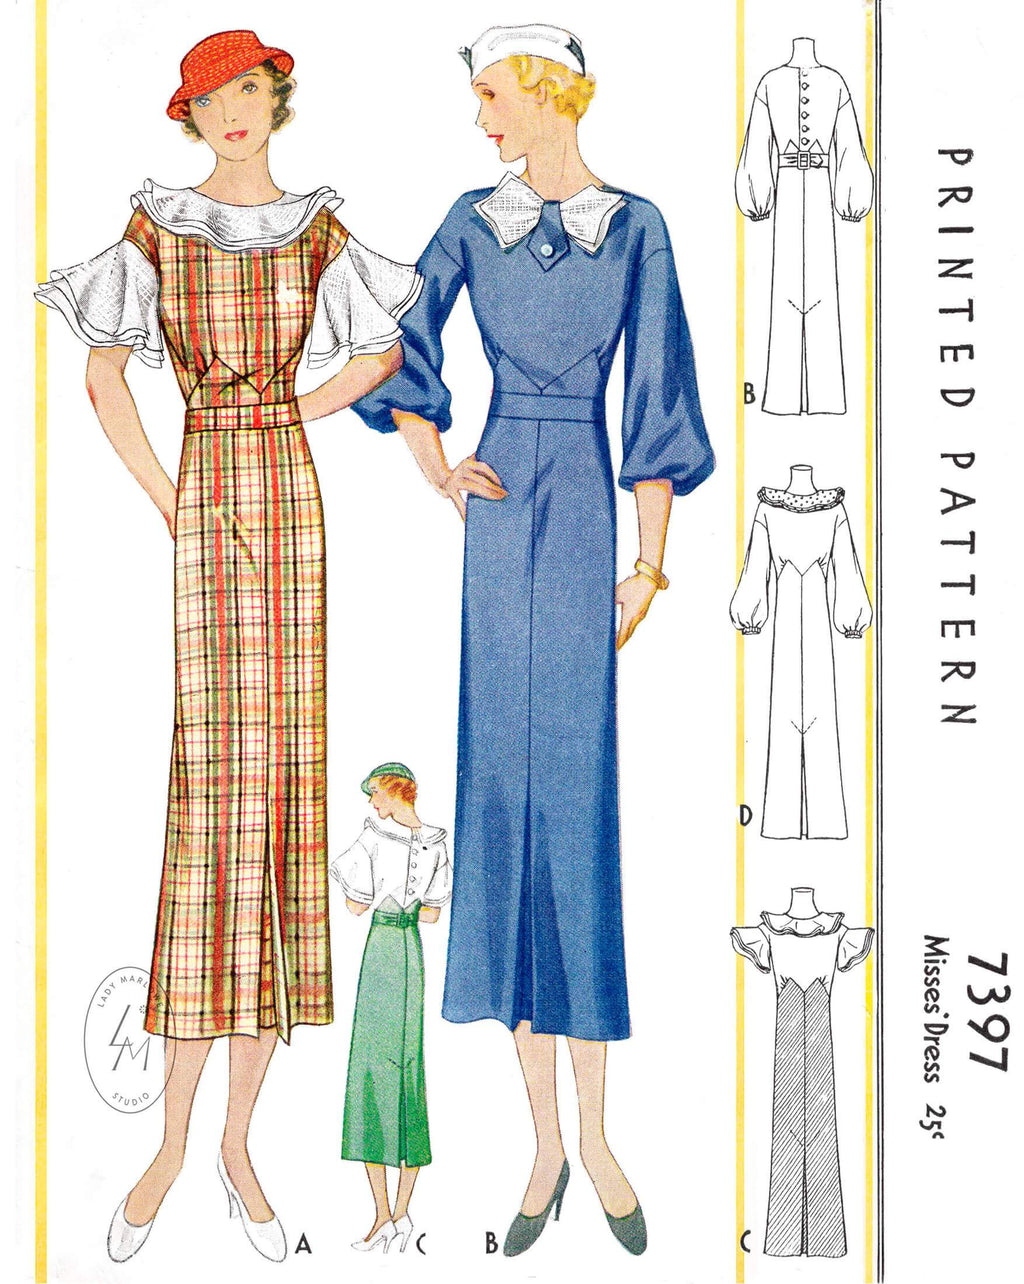 1930s 1933 McCall 7397 art deco dress in 4 styles vintage sewing pattern reproduction